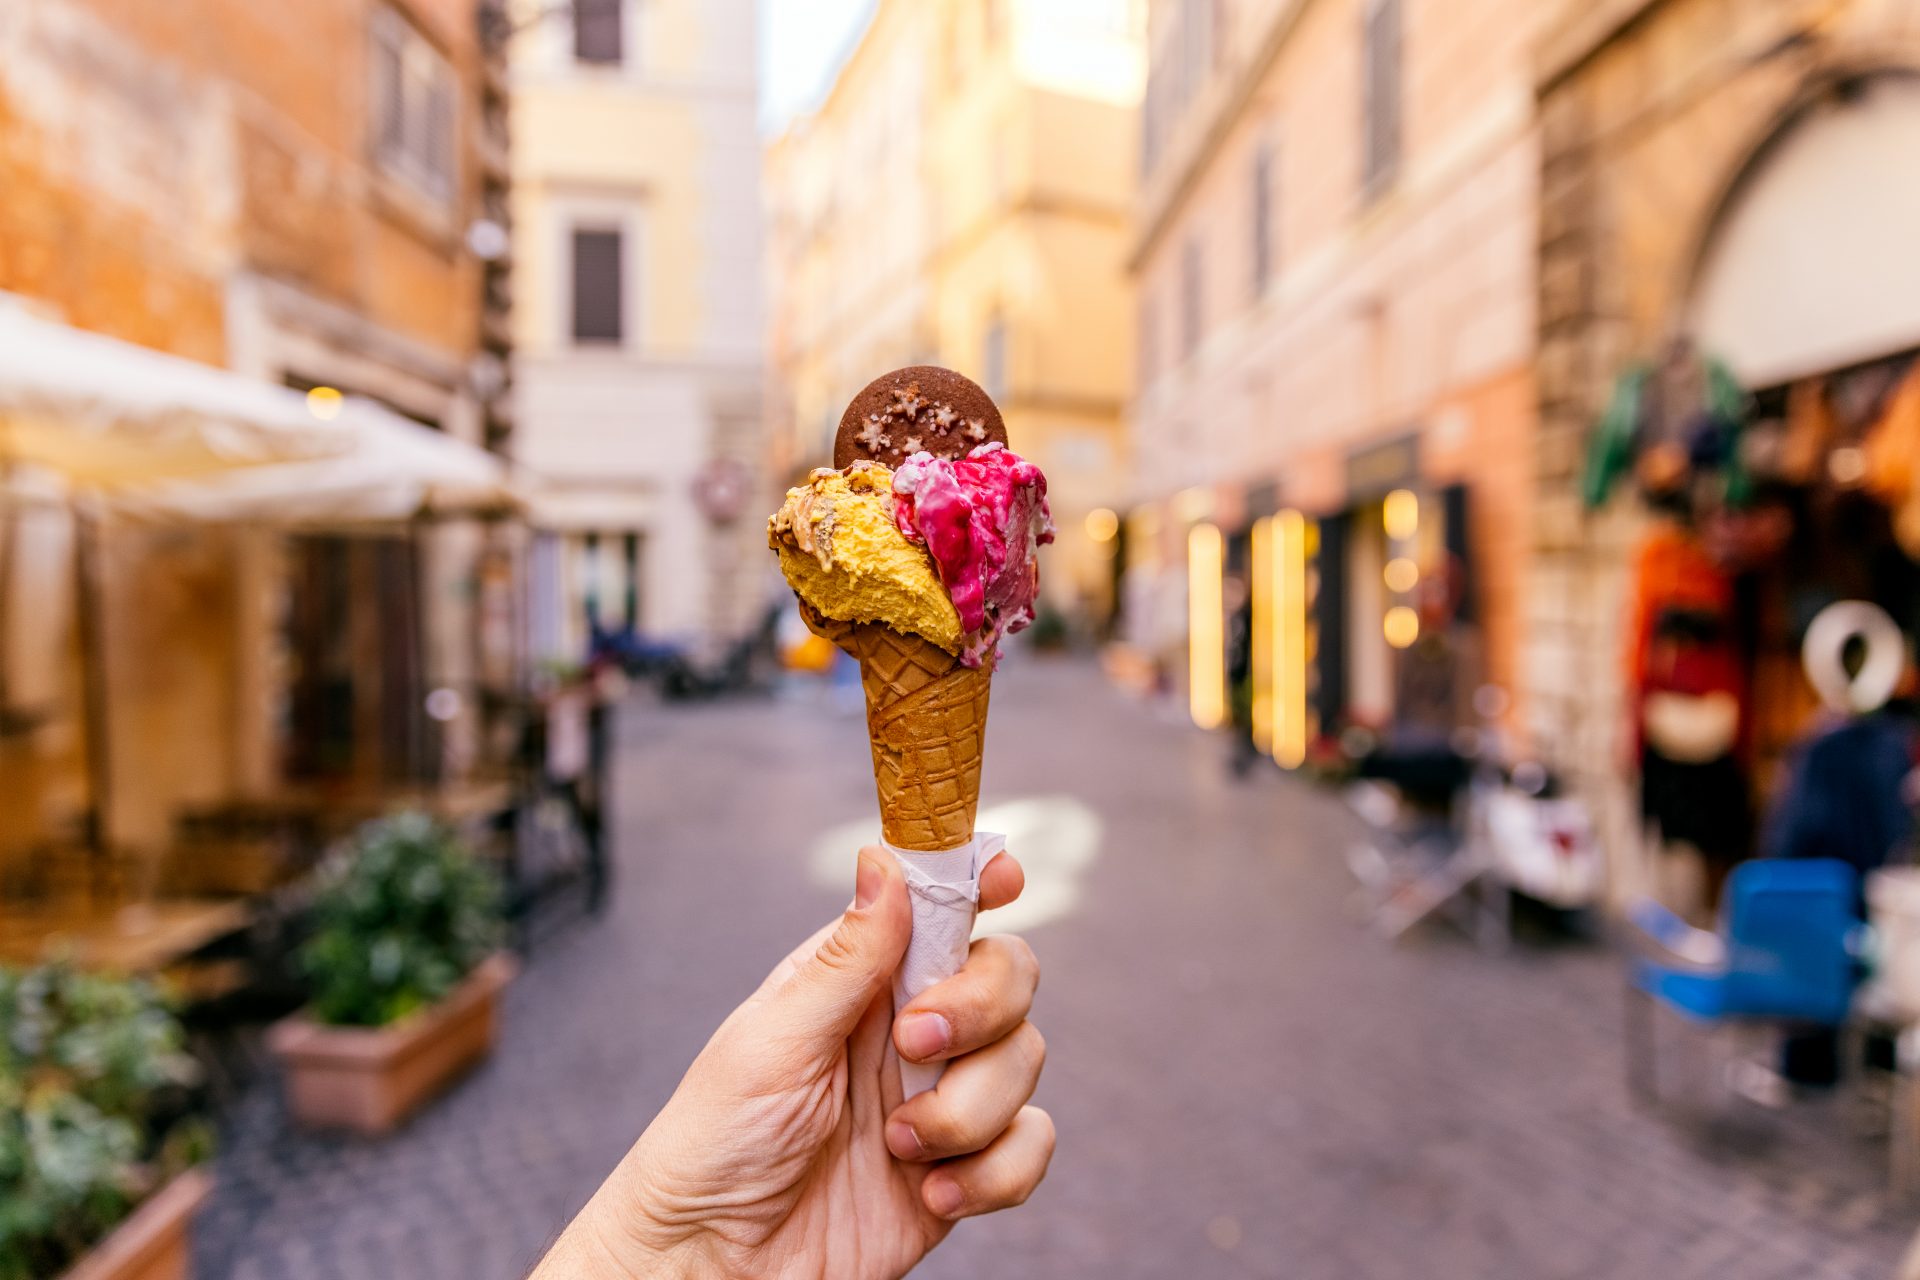 Brain freeze: This Italian city tried to ban ice cream and it backfired spectacularly